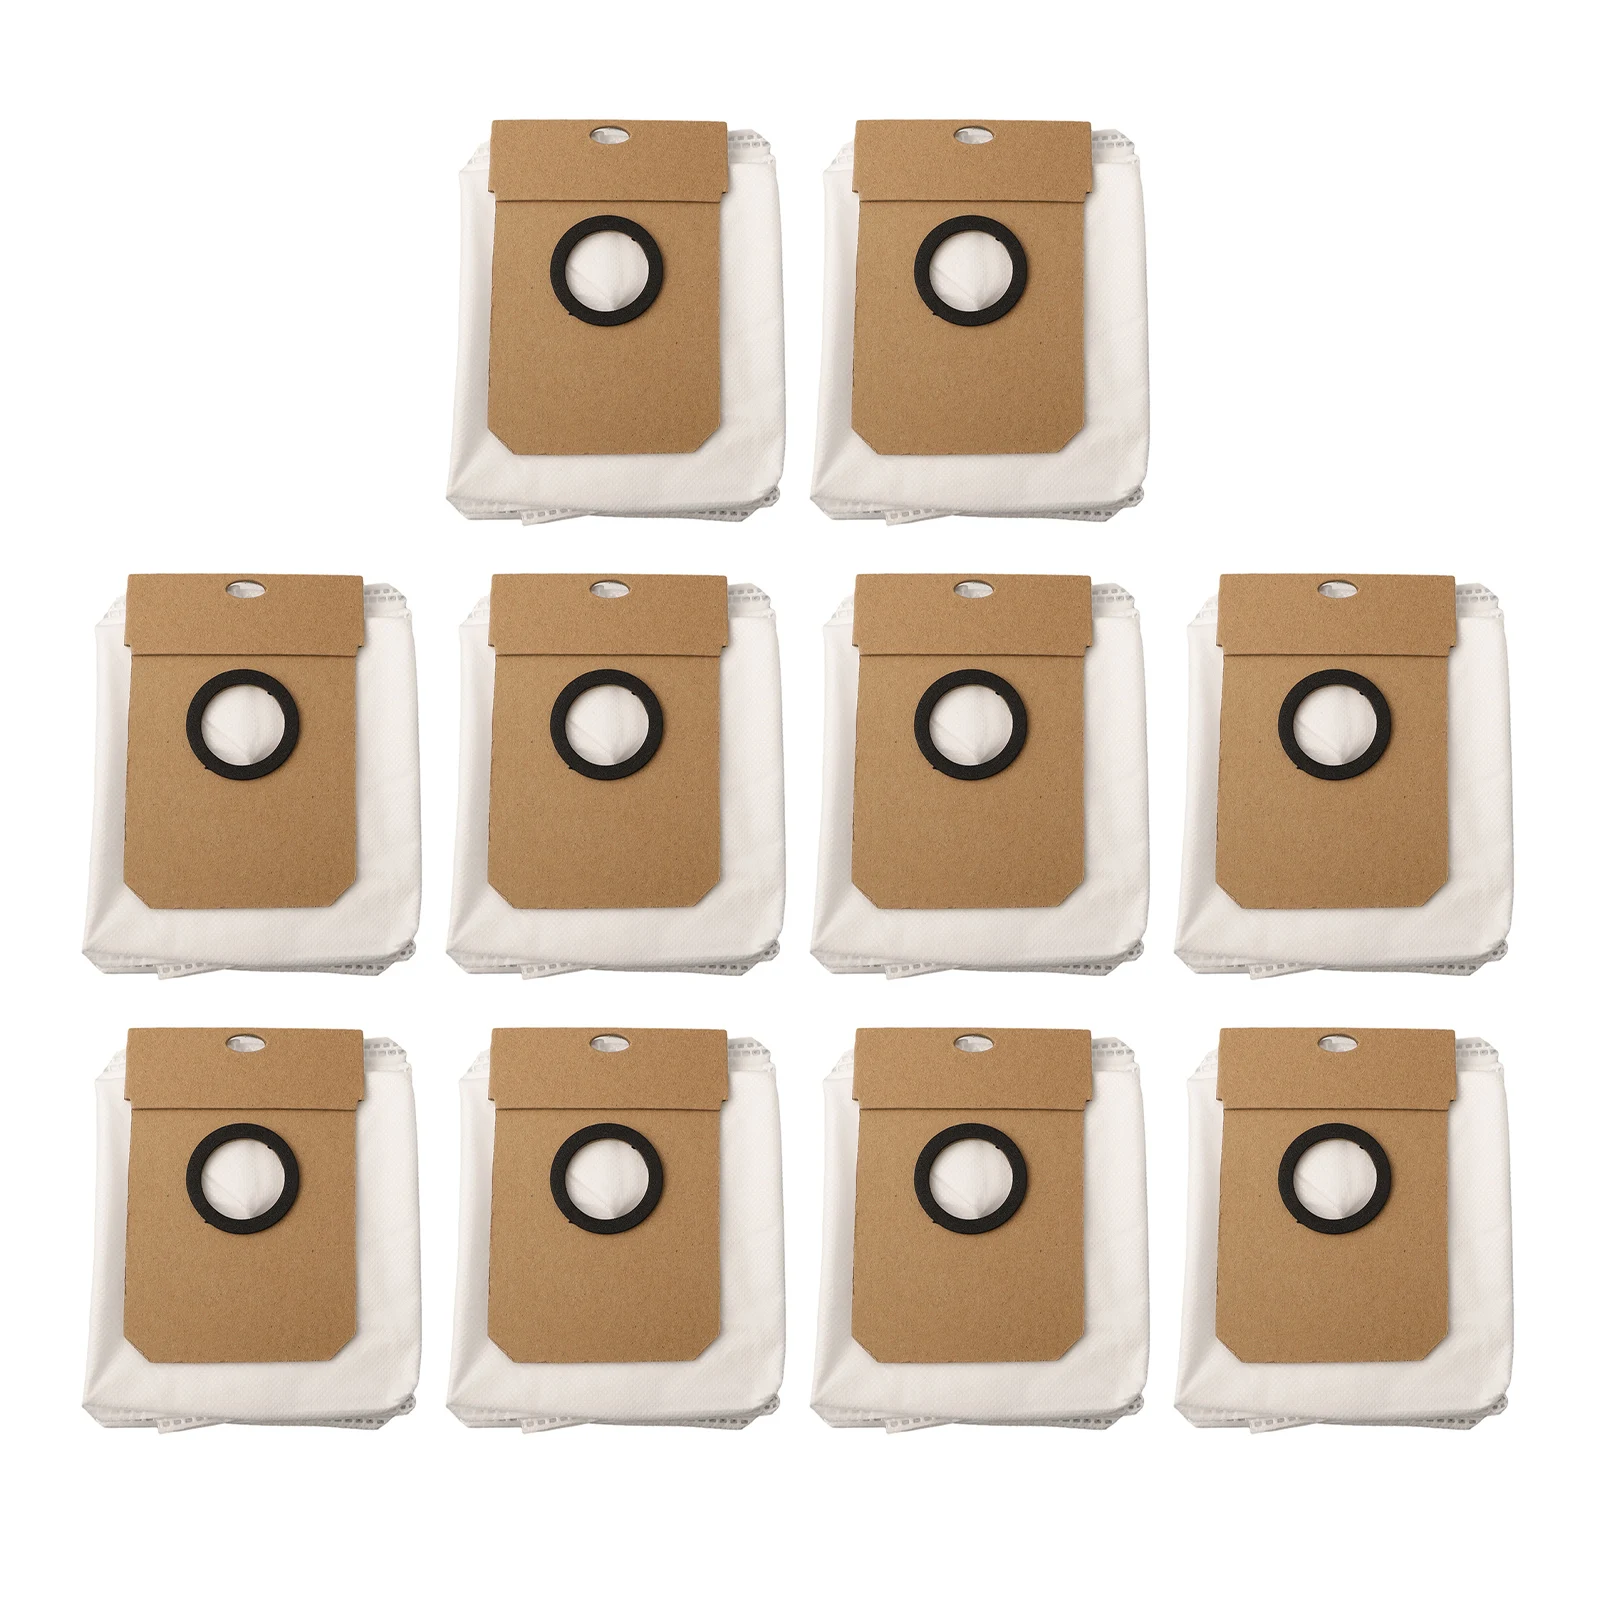 4/10pcs Dust Bags For Cecotec Household Cleaning Tools Accessories Vacuum Cleaner Replacement Parts For Conga 11090